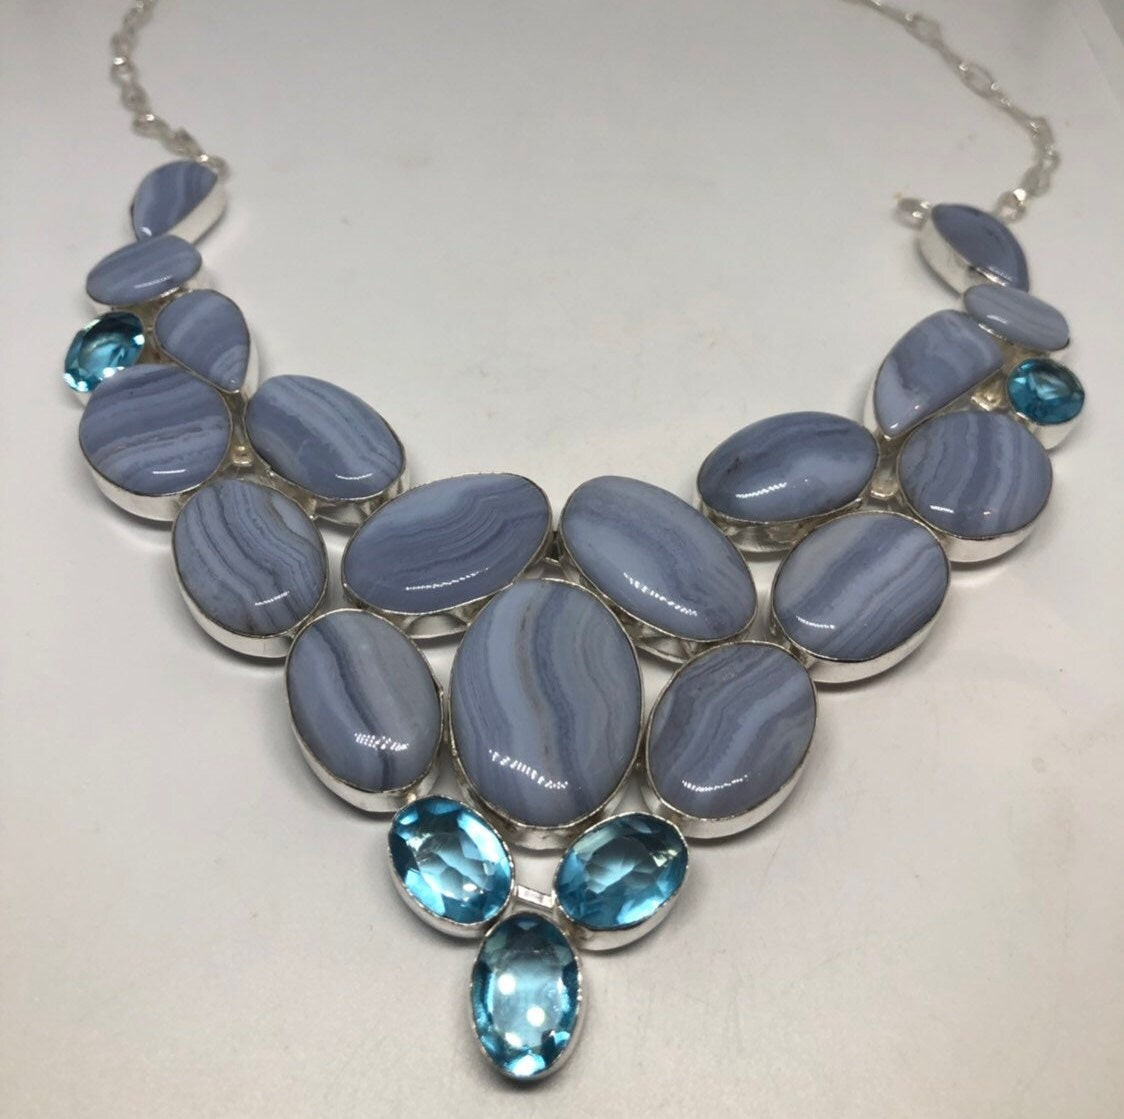 Silver Finished Genuine Facetted Antique Glass and Blue Lace Agate Choker Necklace